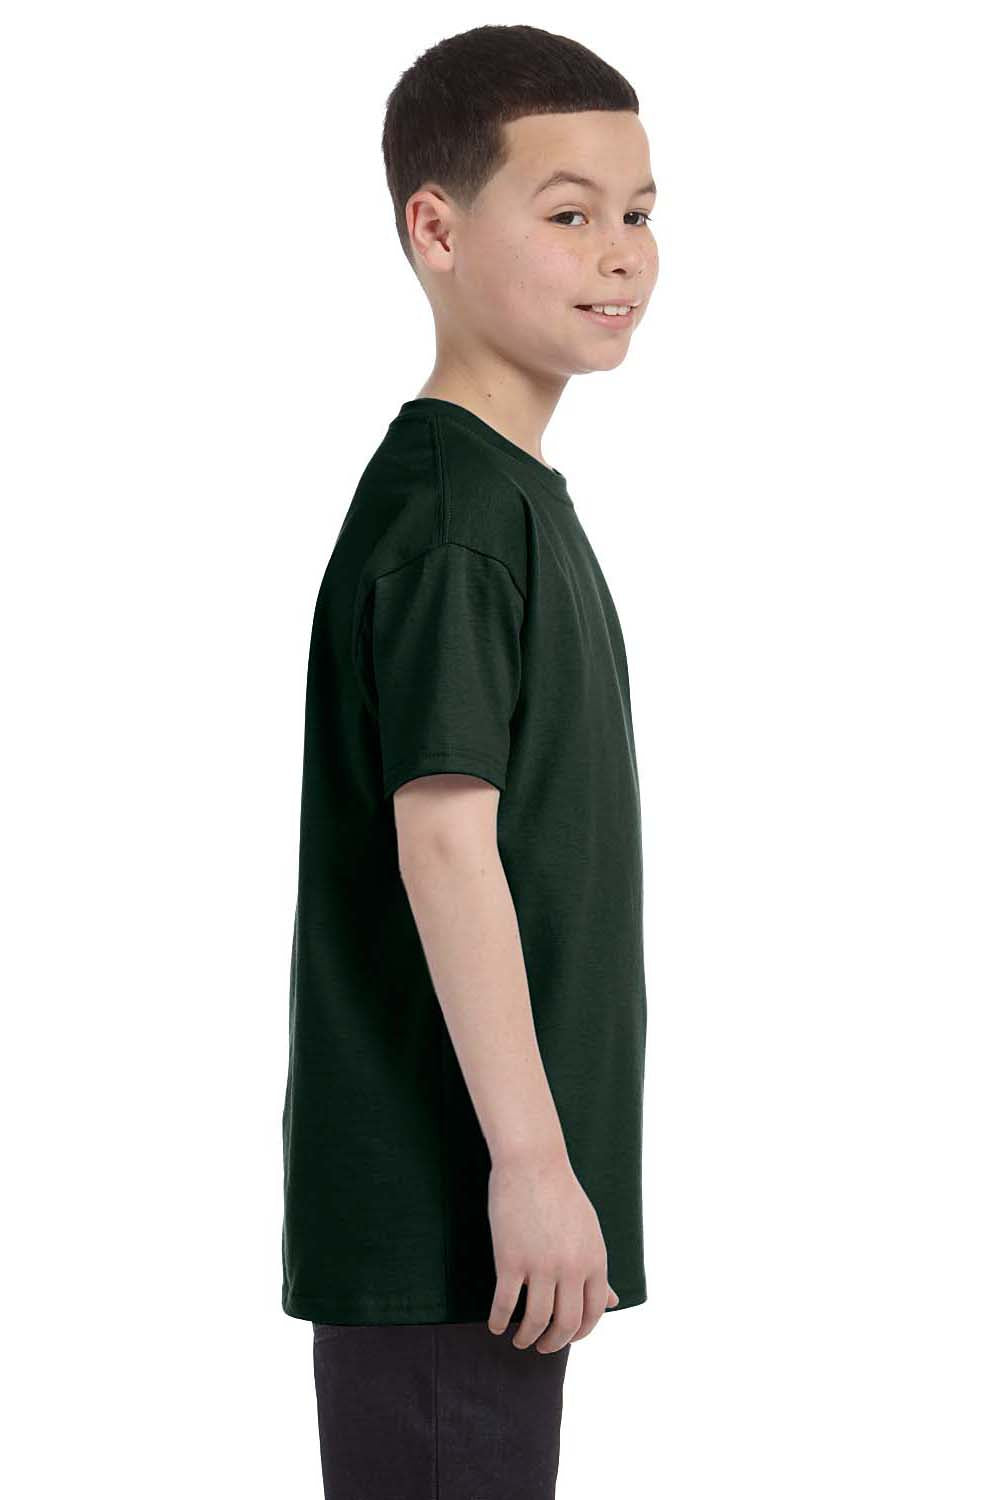 Hanes 54500 Youth ComfortSoft Short Sleeve Crewneck T-Shirt Forest Green Side